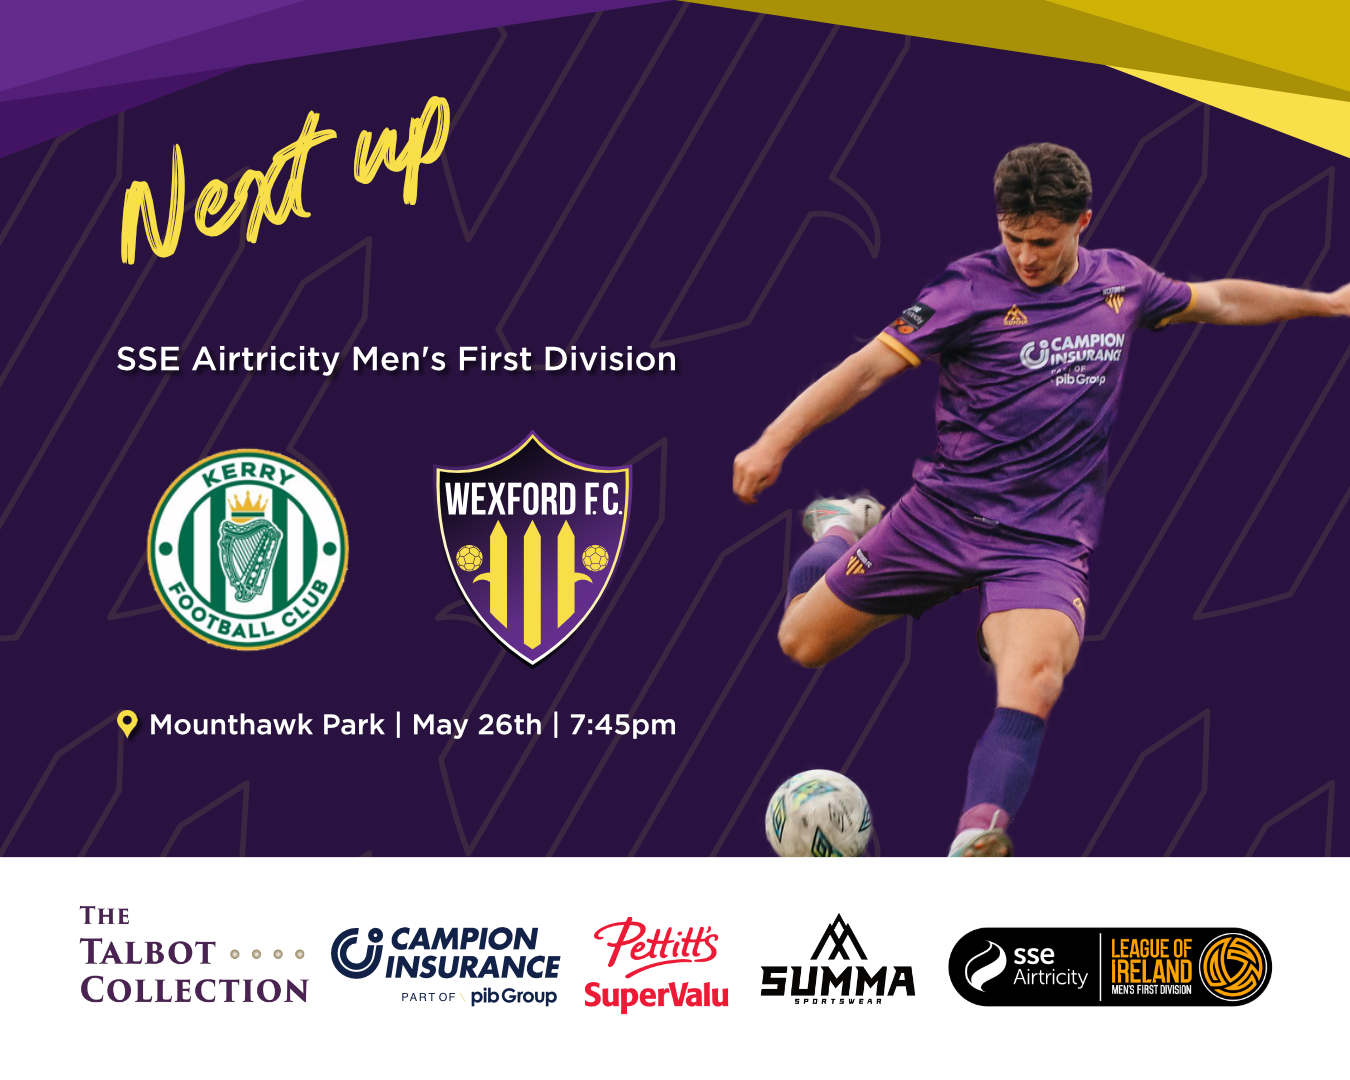 Match Preview: Kerry FC vs Wexford FC